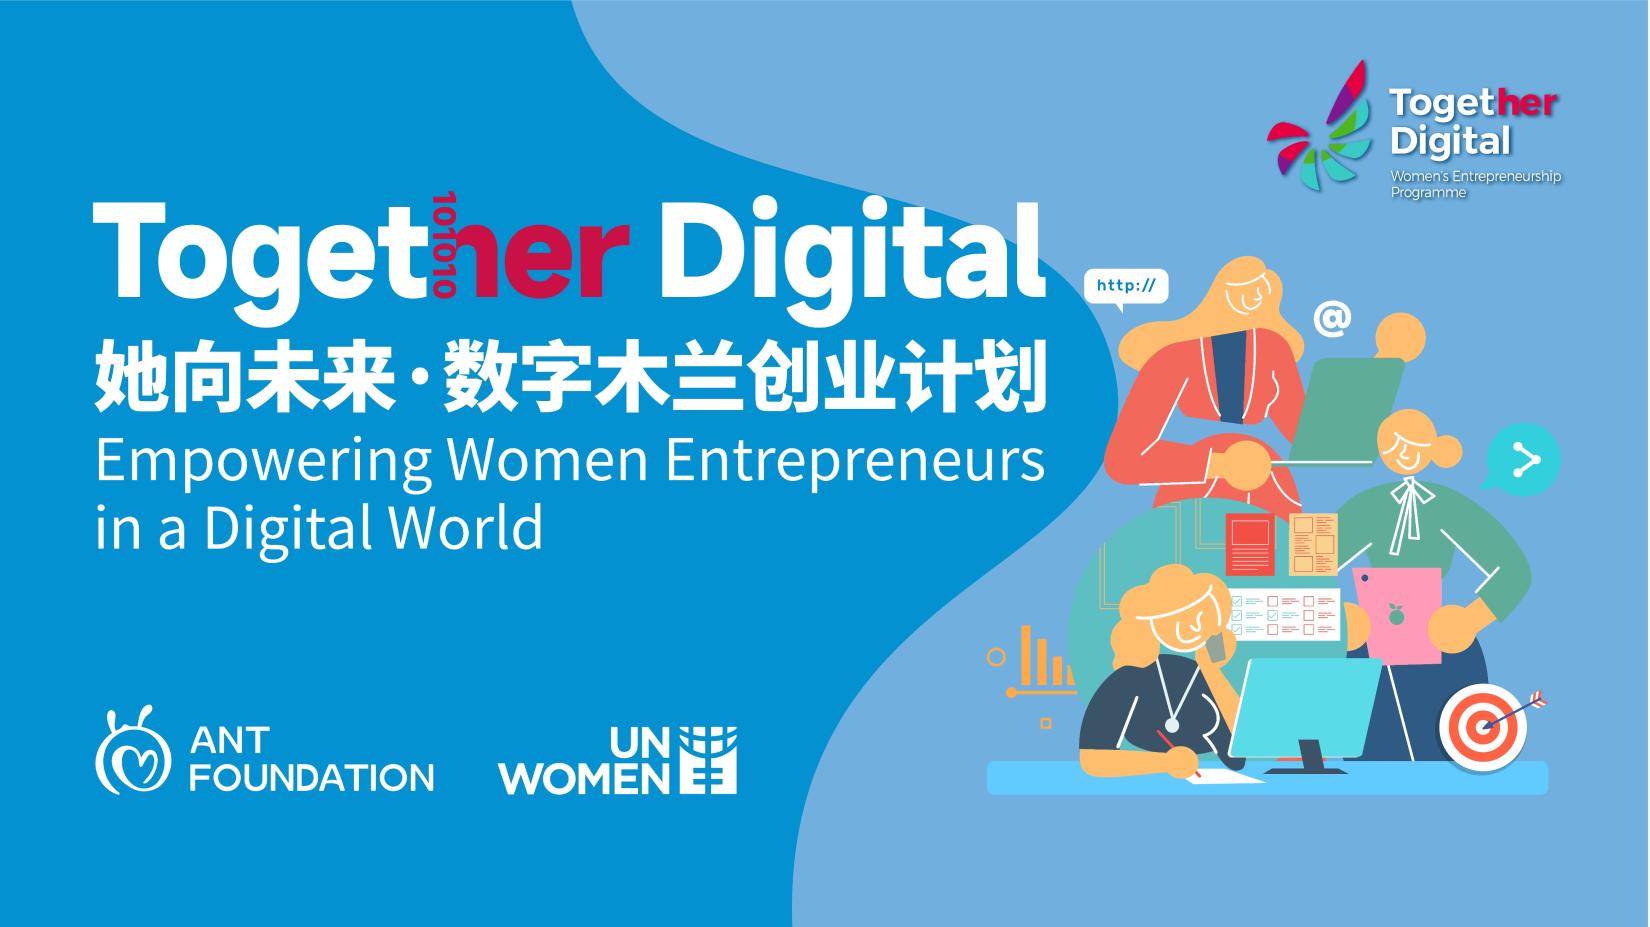 “Together Digital” supports women-led MSMEs to better participate and thrive in the digital economy